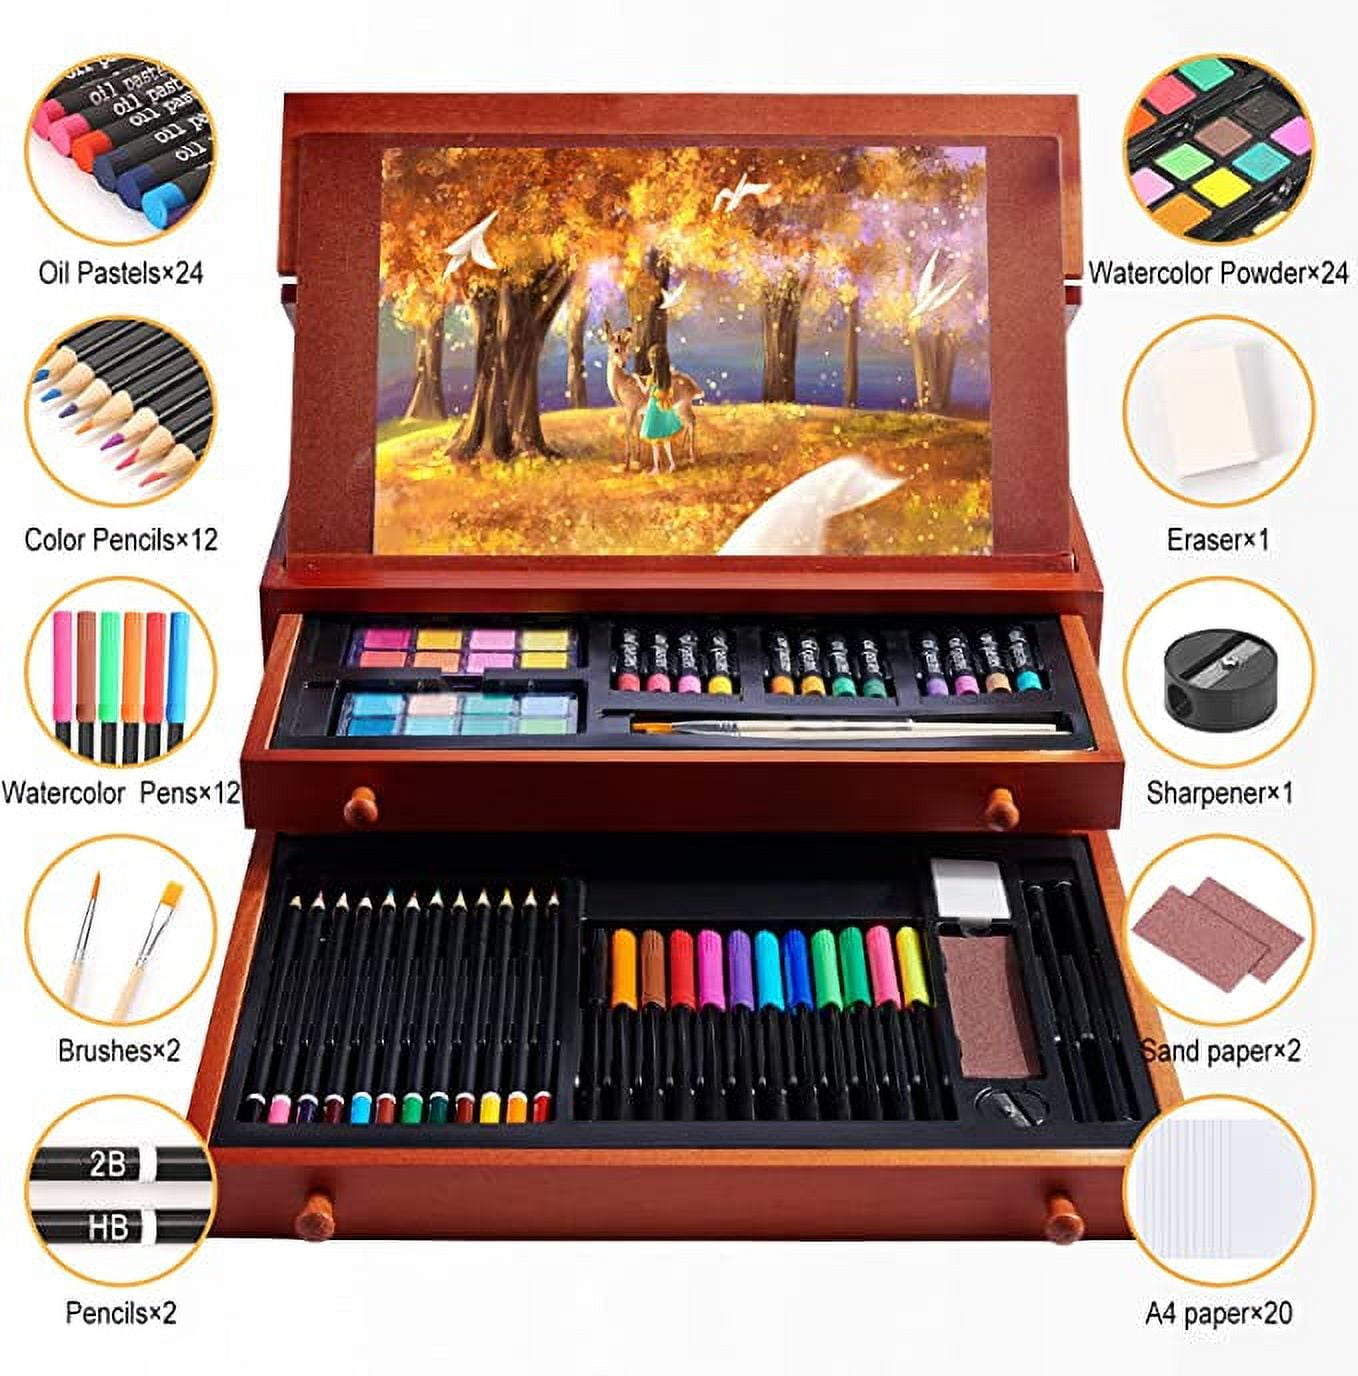 FixtureDisplays 80 Pieces of Deluxe Art Set-Painting Art Supplies-Compact  Carrying Case-An Ideal Gift for Beginners & Reviews